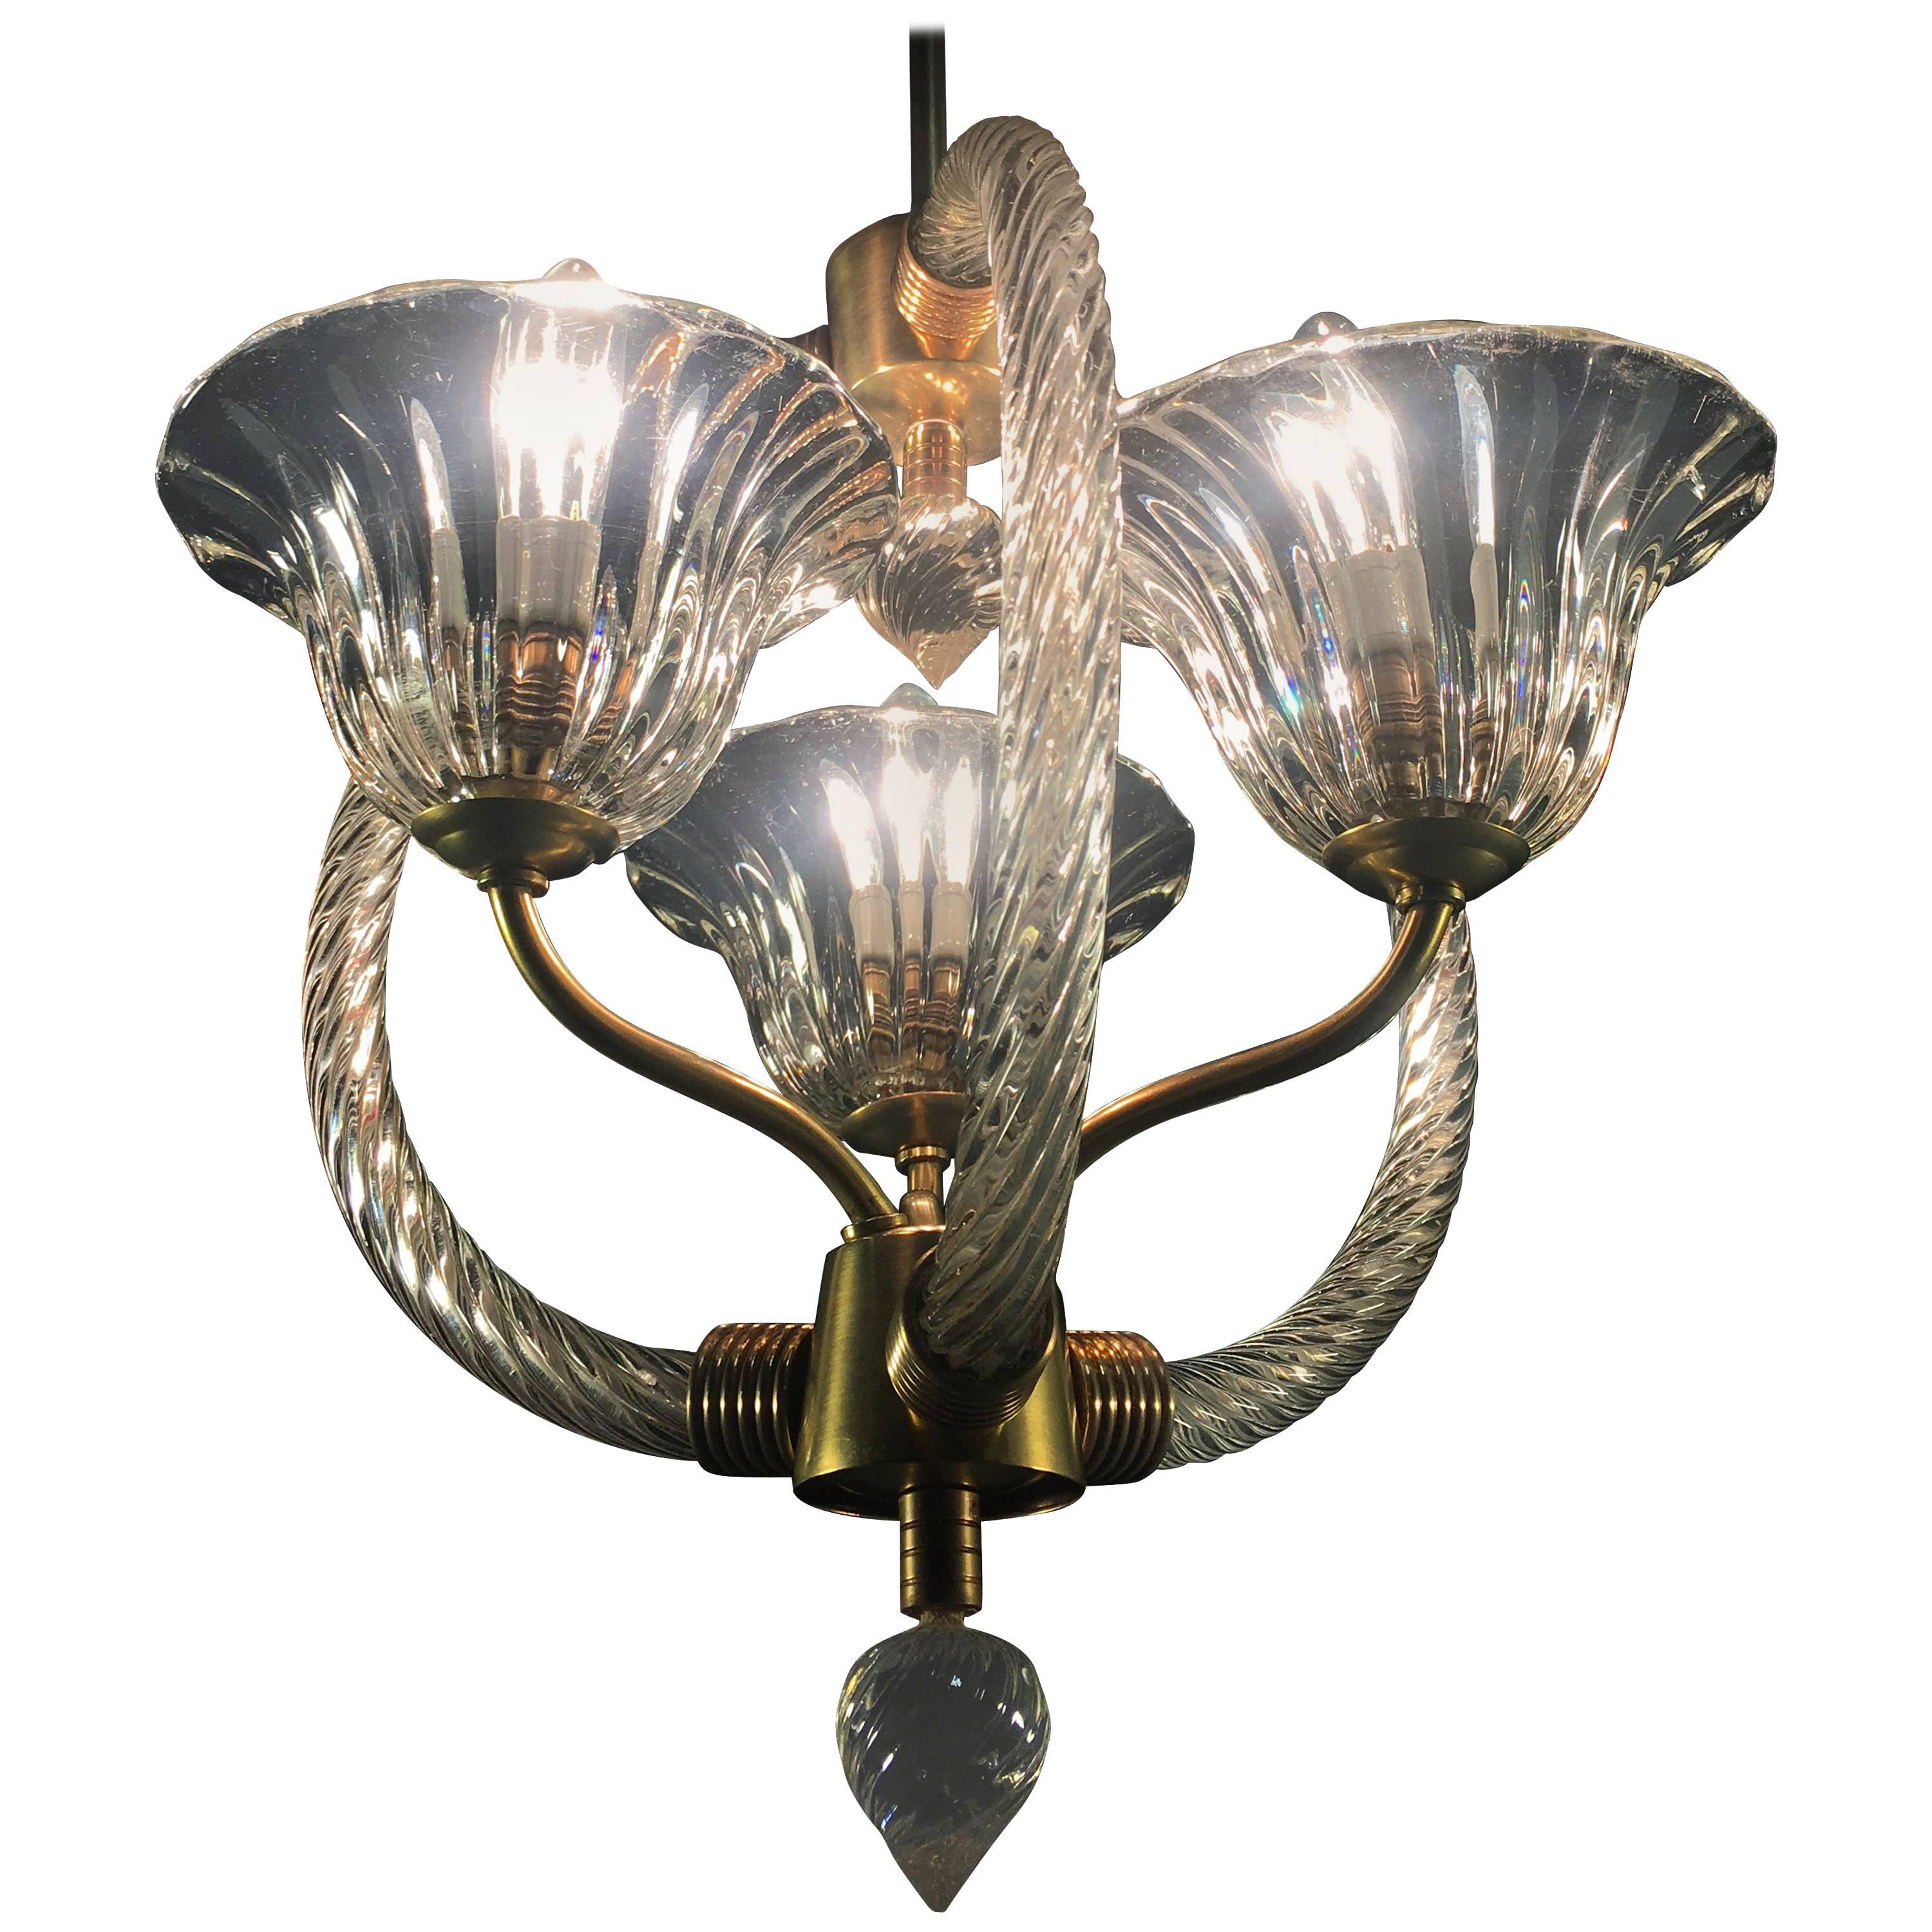 Charming Italian Chandelier by Barovier & Toso, Murano, 1940 For Sale